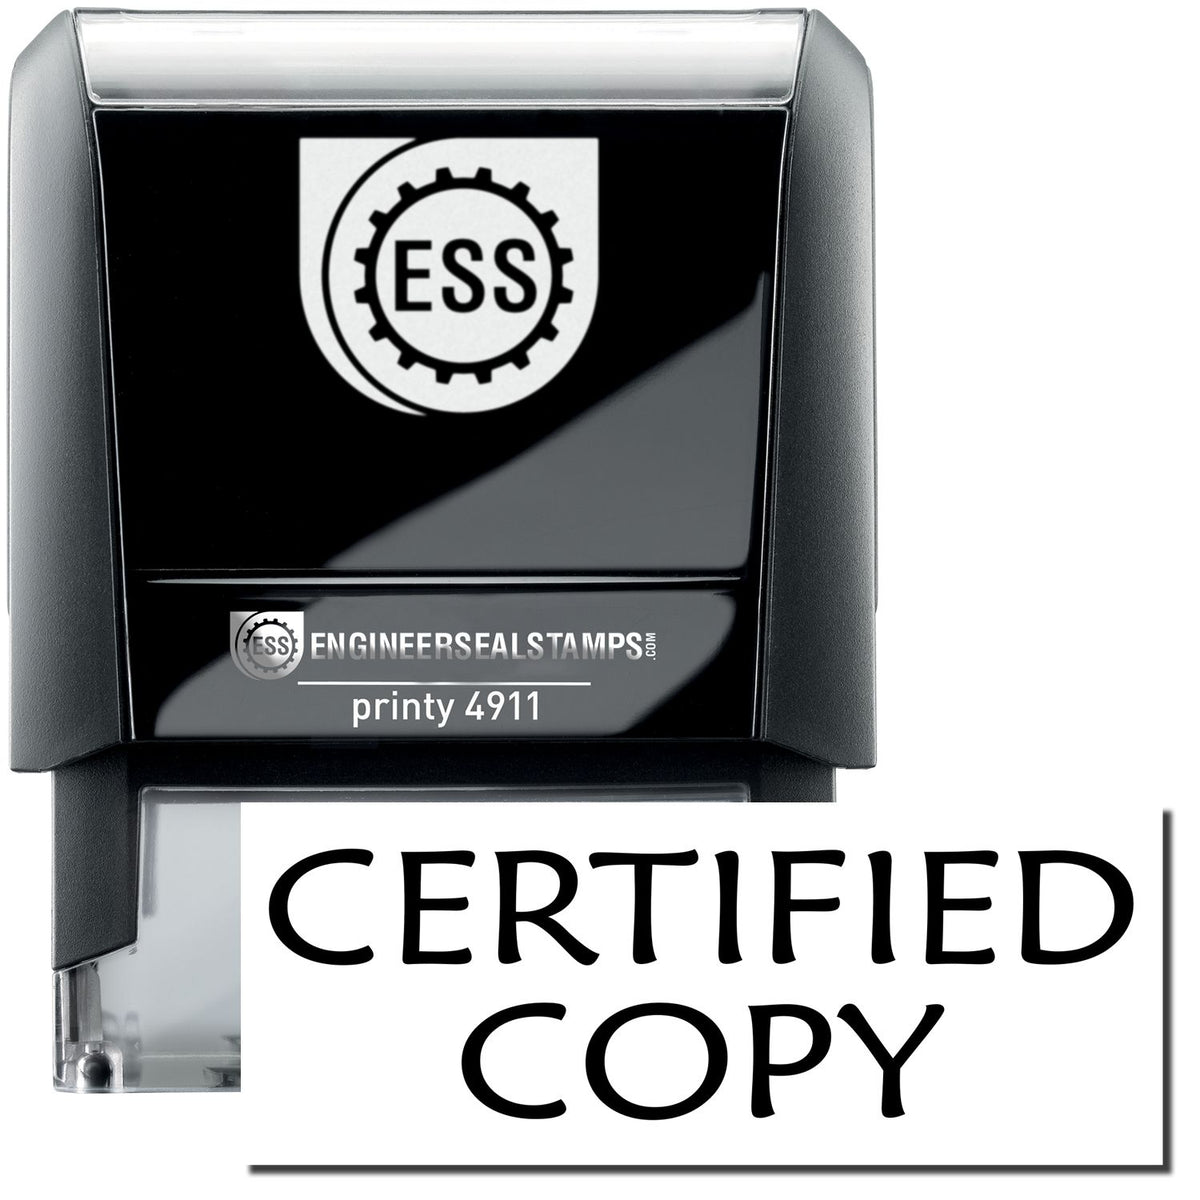 A self-inking stamp with a stamped image showing how the text &quot;CERTIFIED COPY&quot; is displayed after stamping.